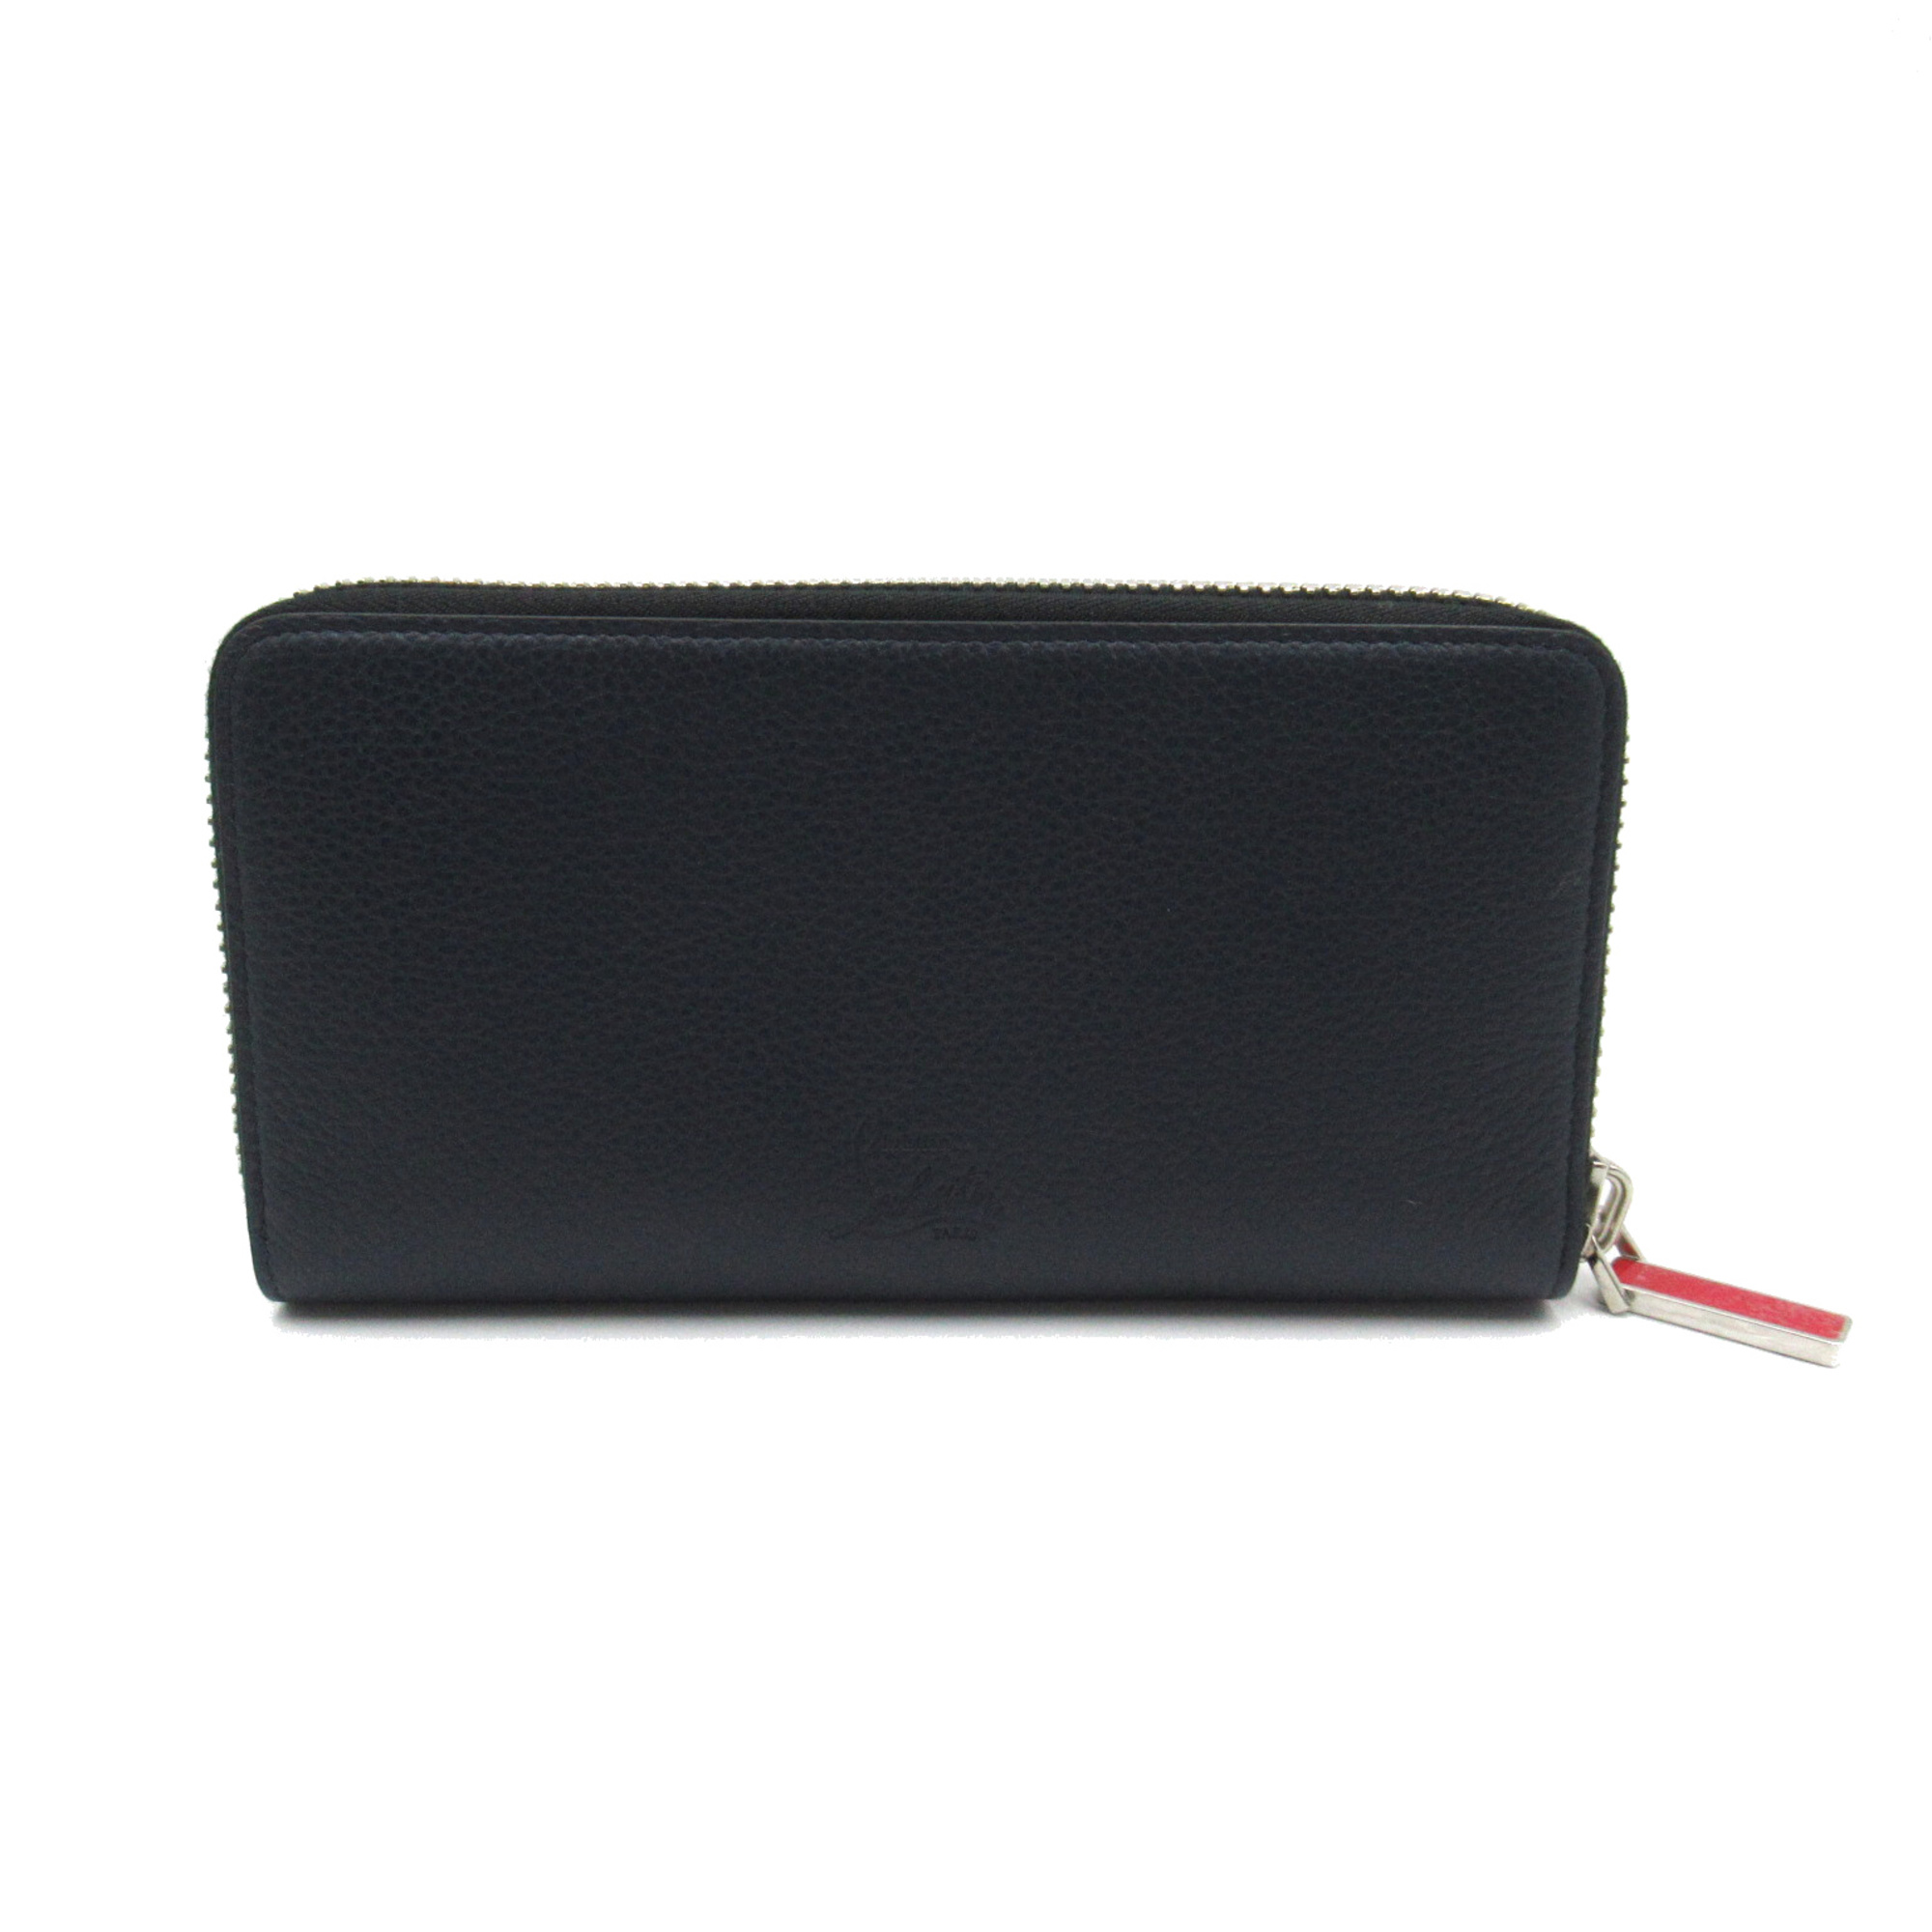 Christian Louboutin panettone wallet purse Navy leather 1165044V088